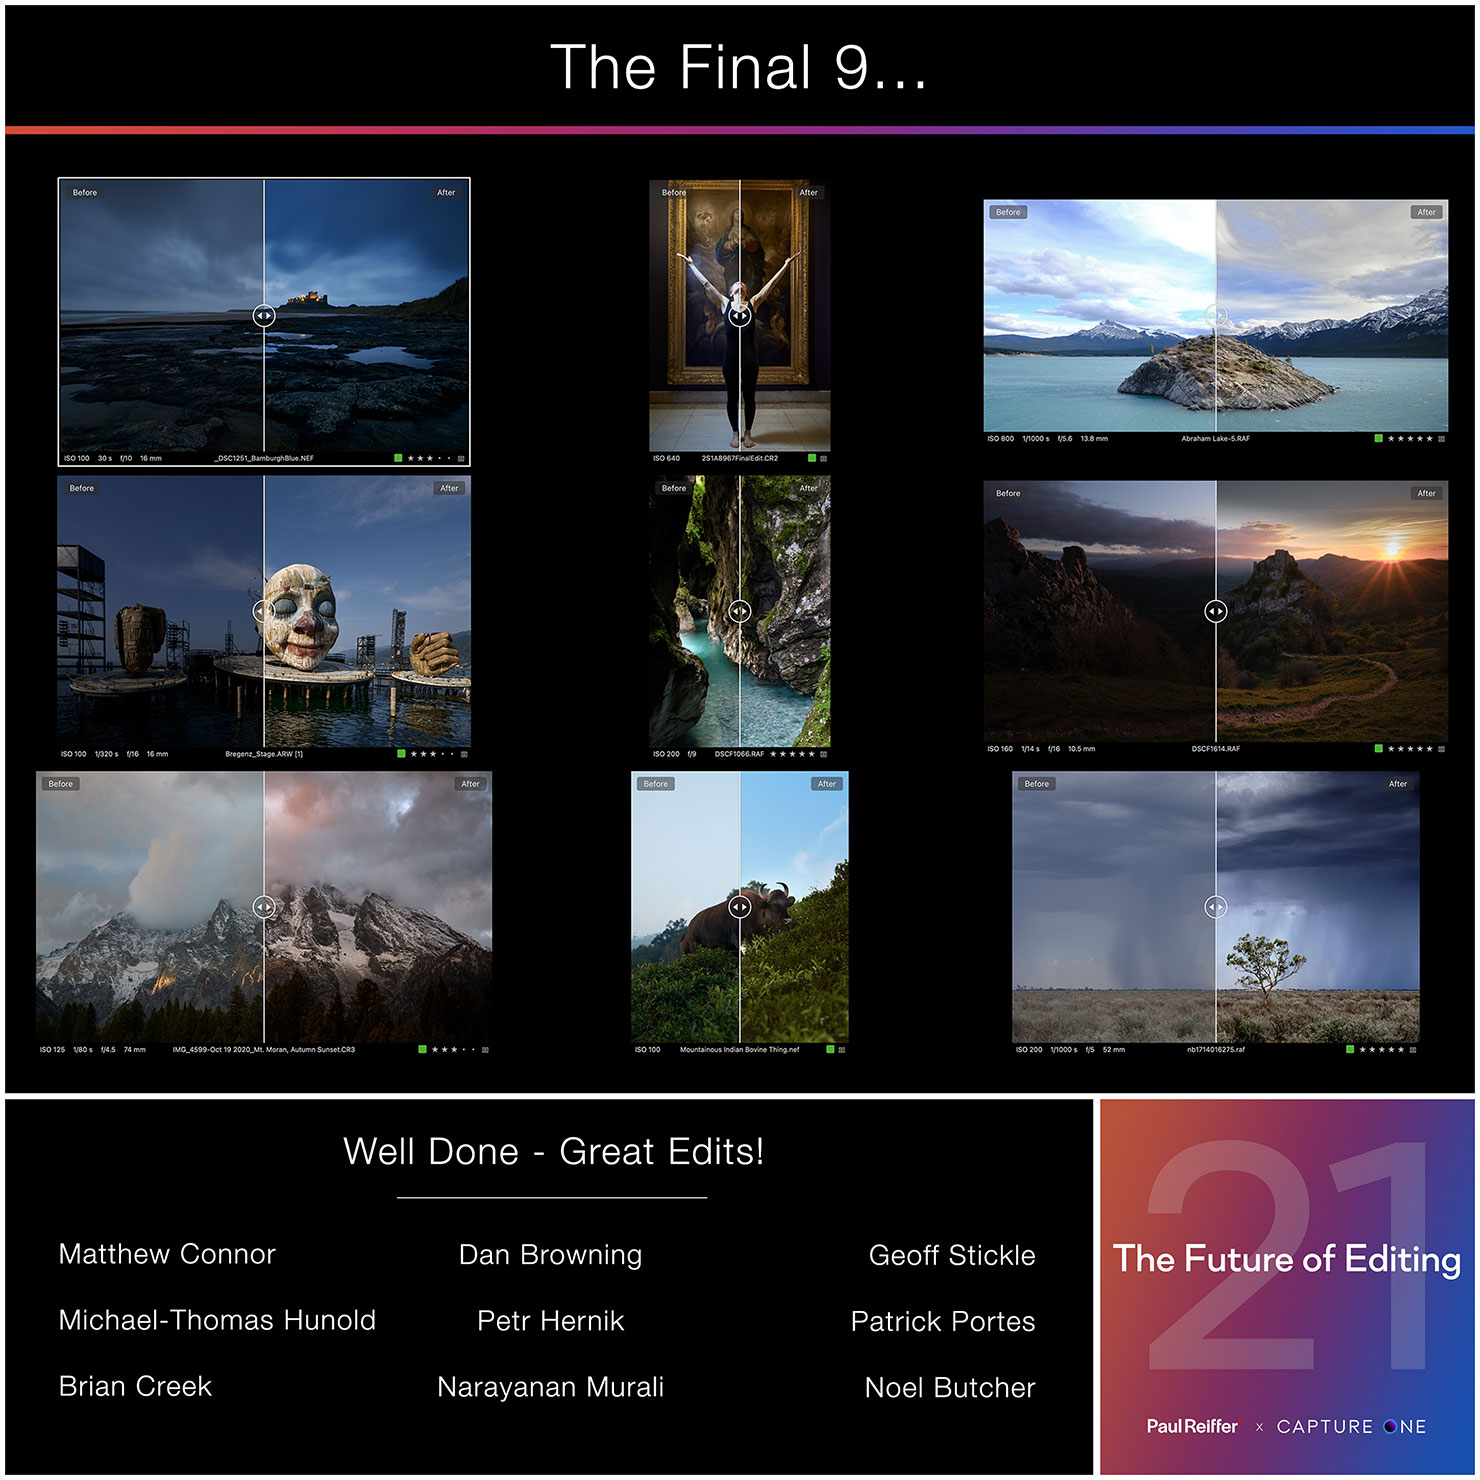 Capture One 21 Competition Final 9 Images Judging David Grover Paul Reiffer